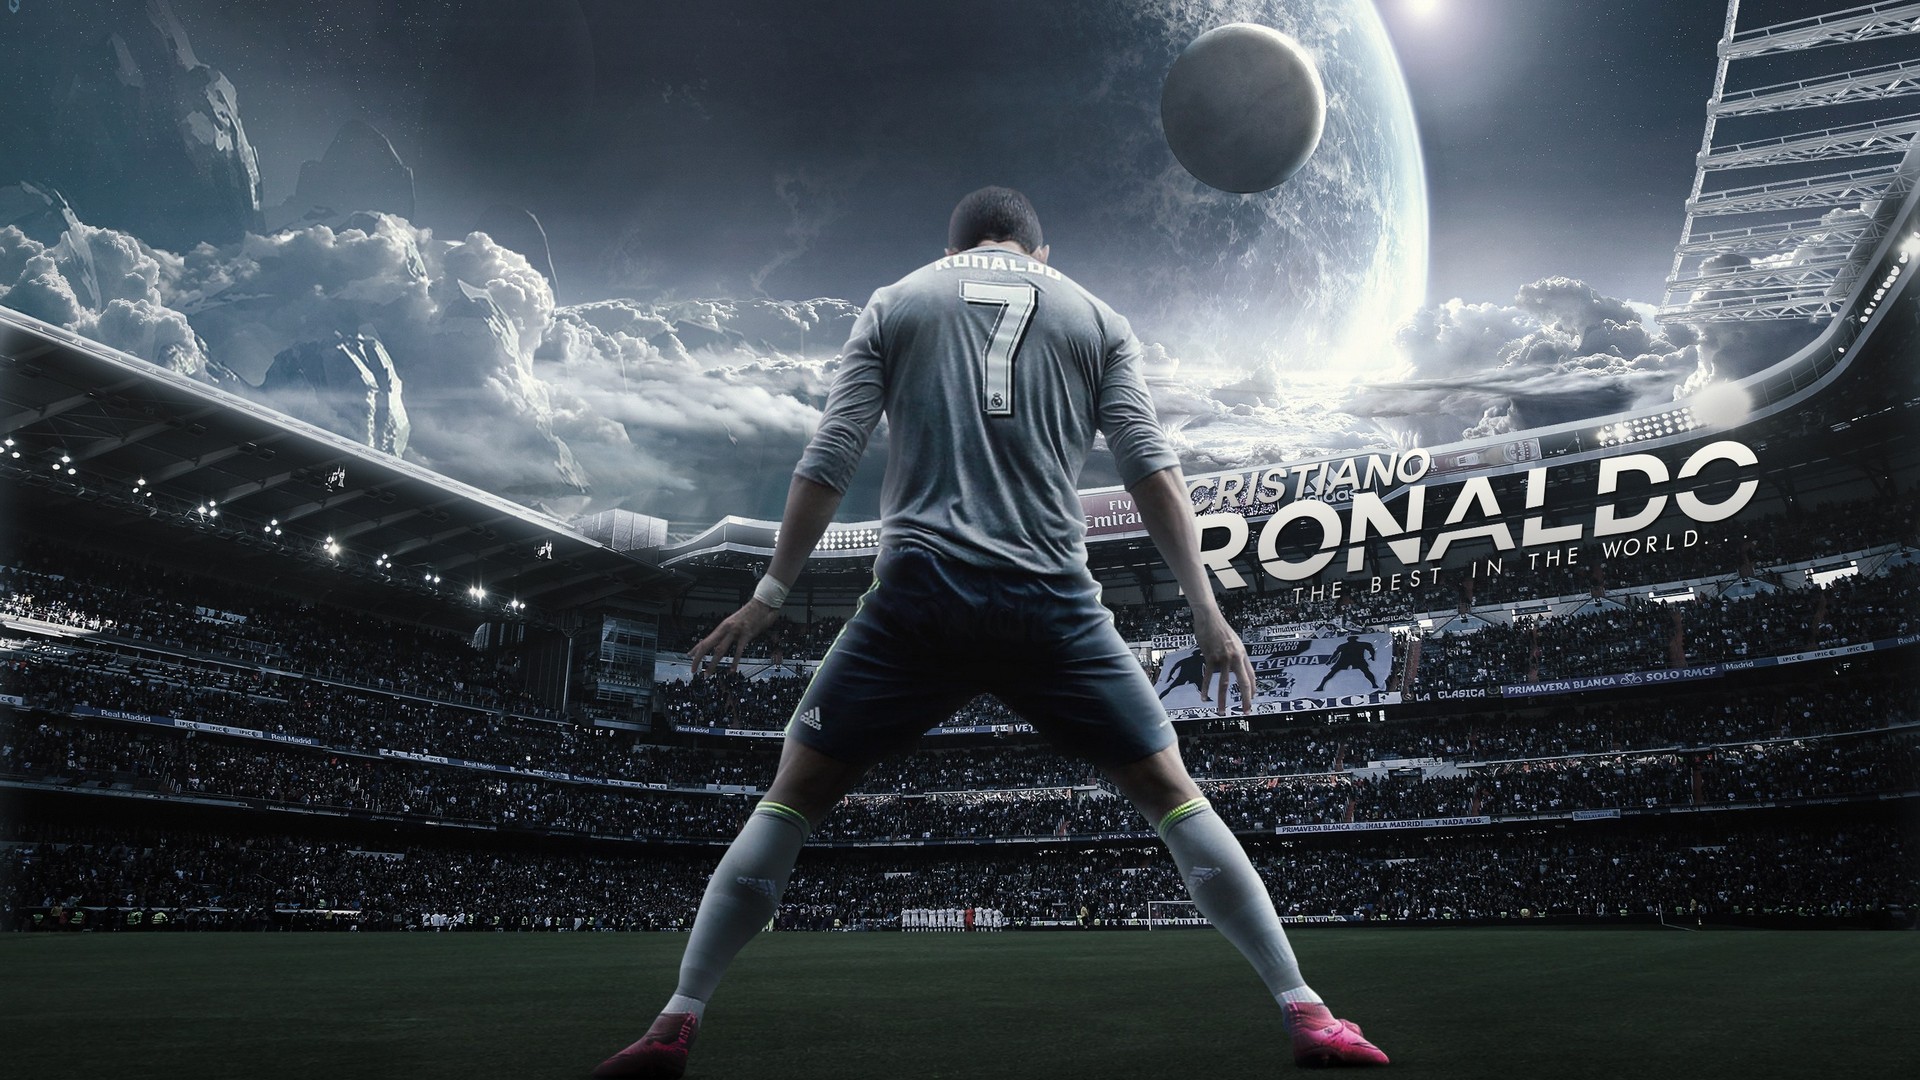 Cristiano Ronaldo Juventus Wallpaper HD With Resolution 1920X1080 pixel. You can make this wallpaper for your Desktop Computer Backgrounds, Mac Wallpapers, Android Lock screen or iPhone Screensavers